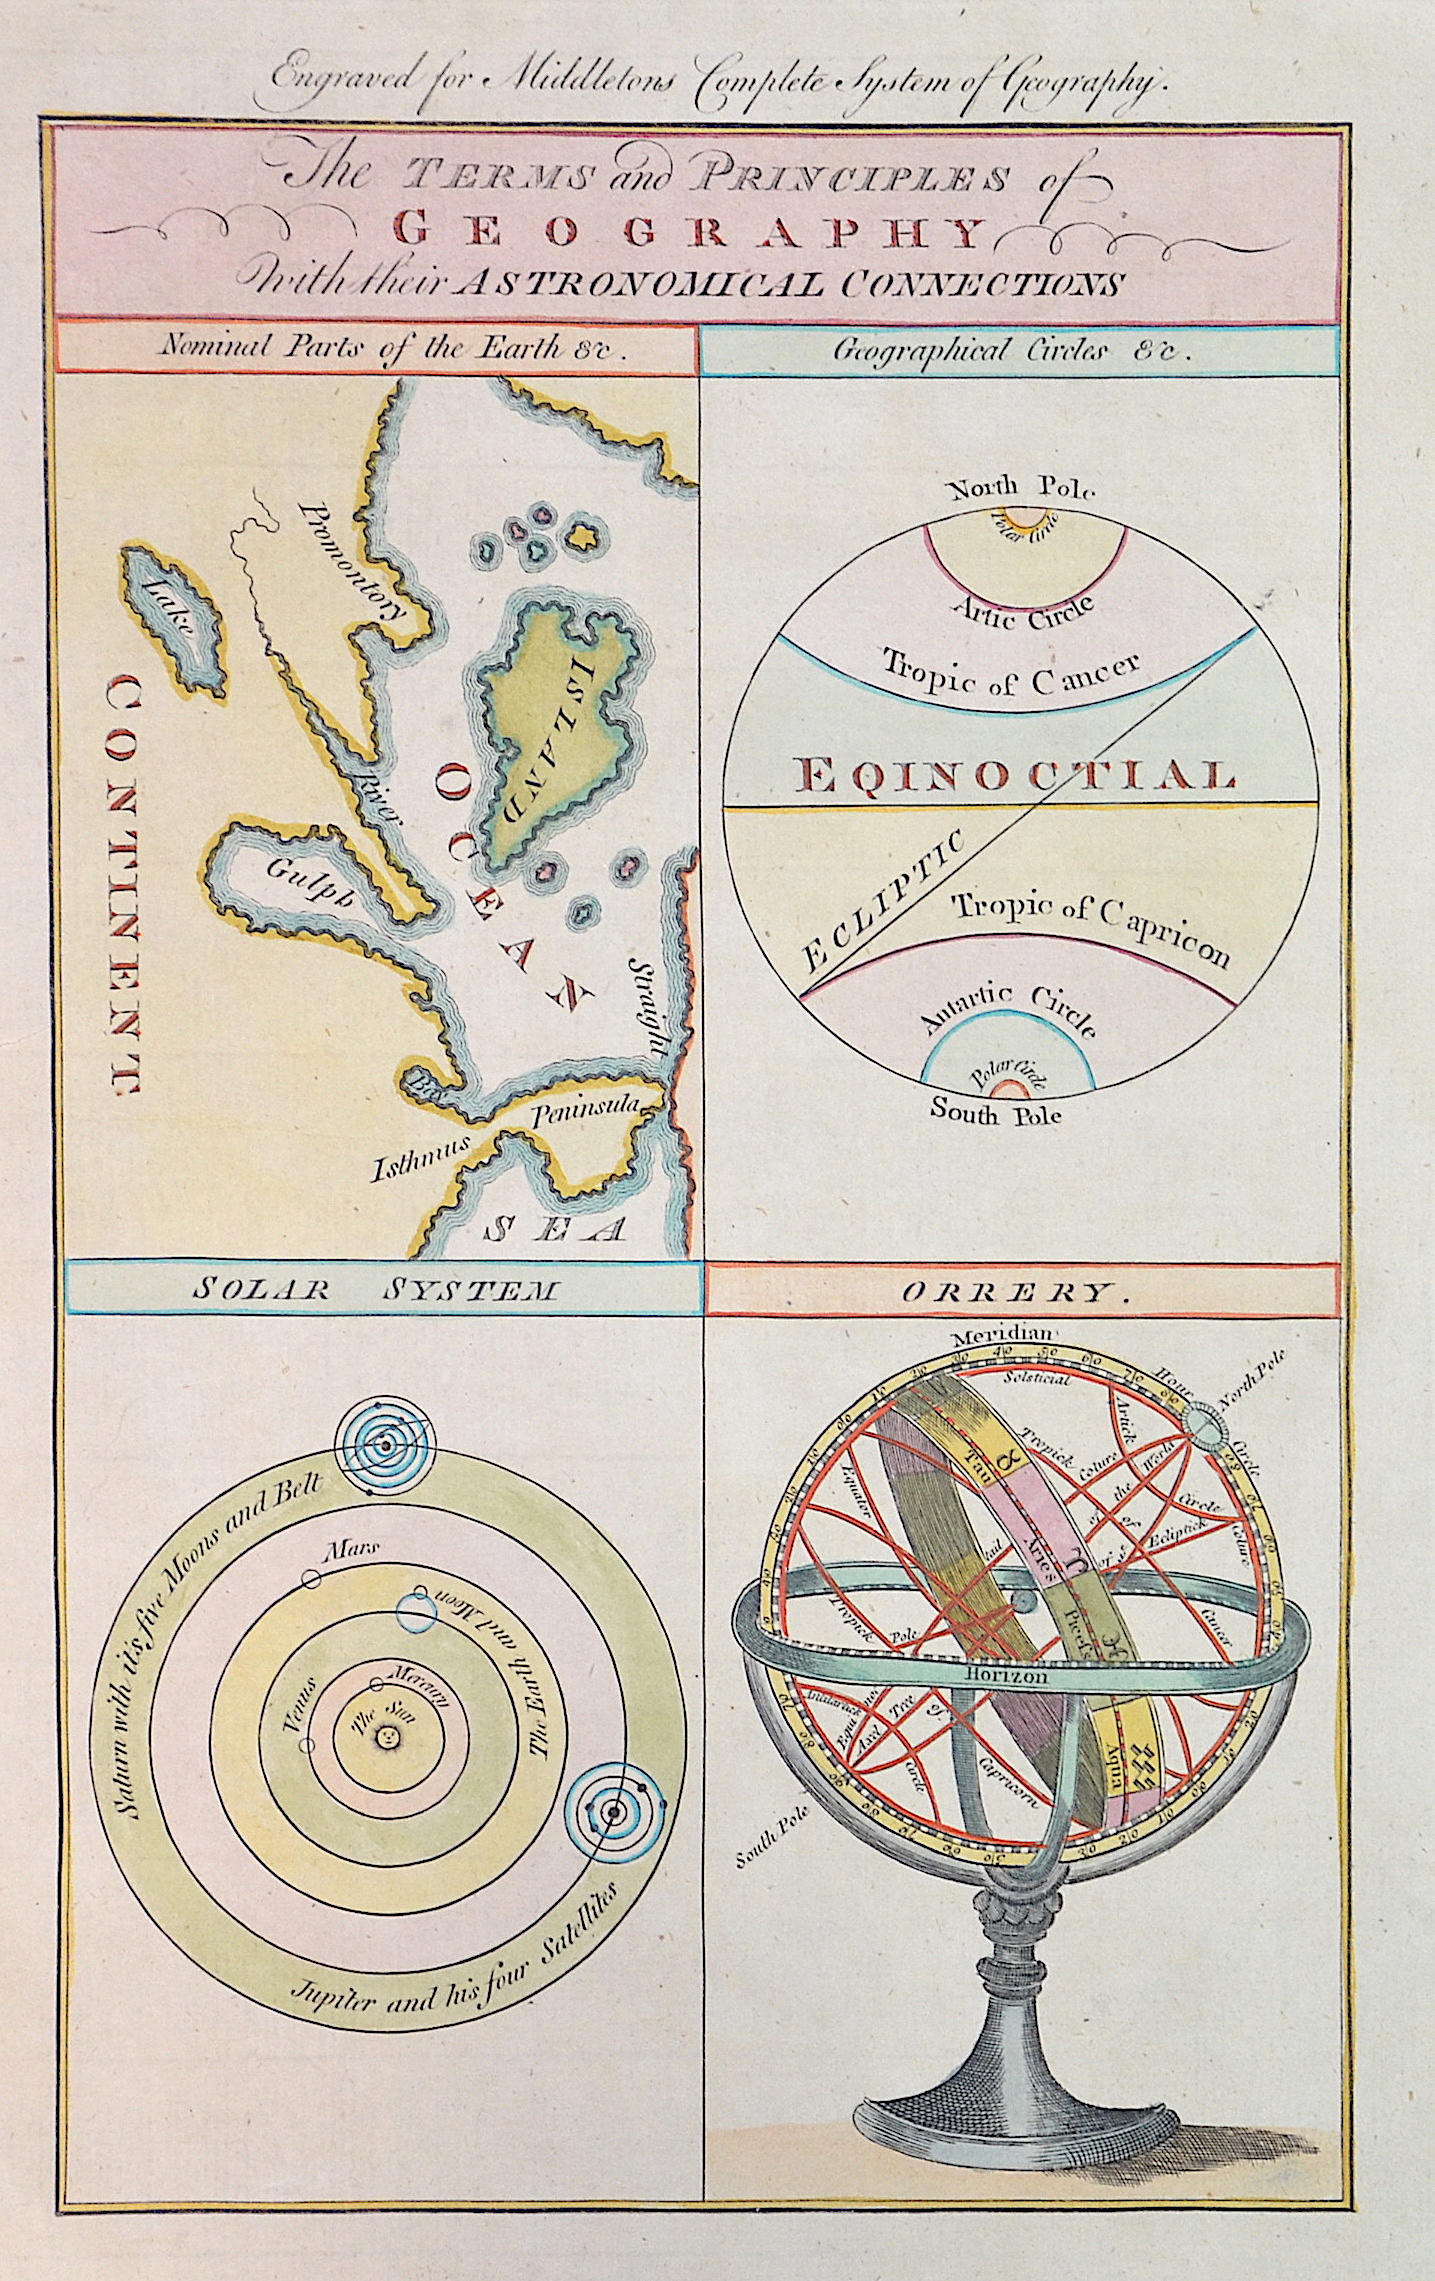 Anonymus  The terms and principles of geography with their Astronomical Connections